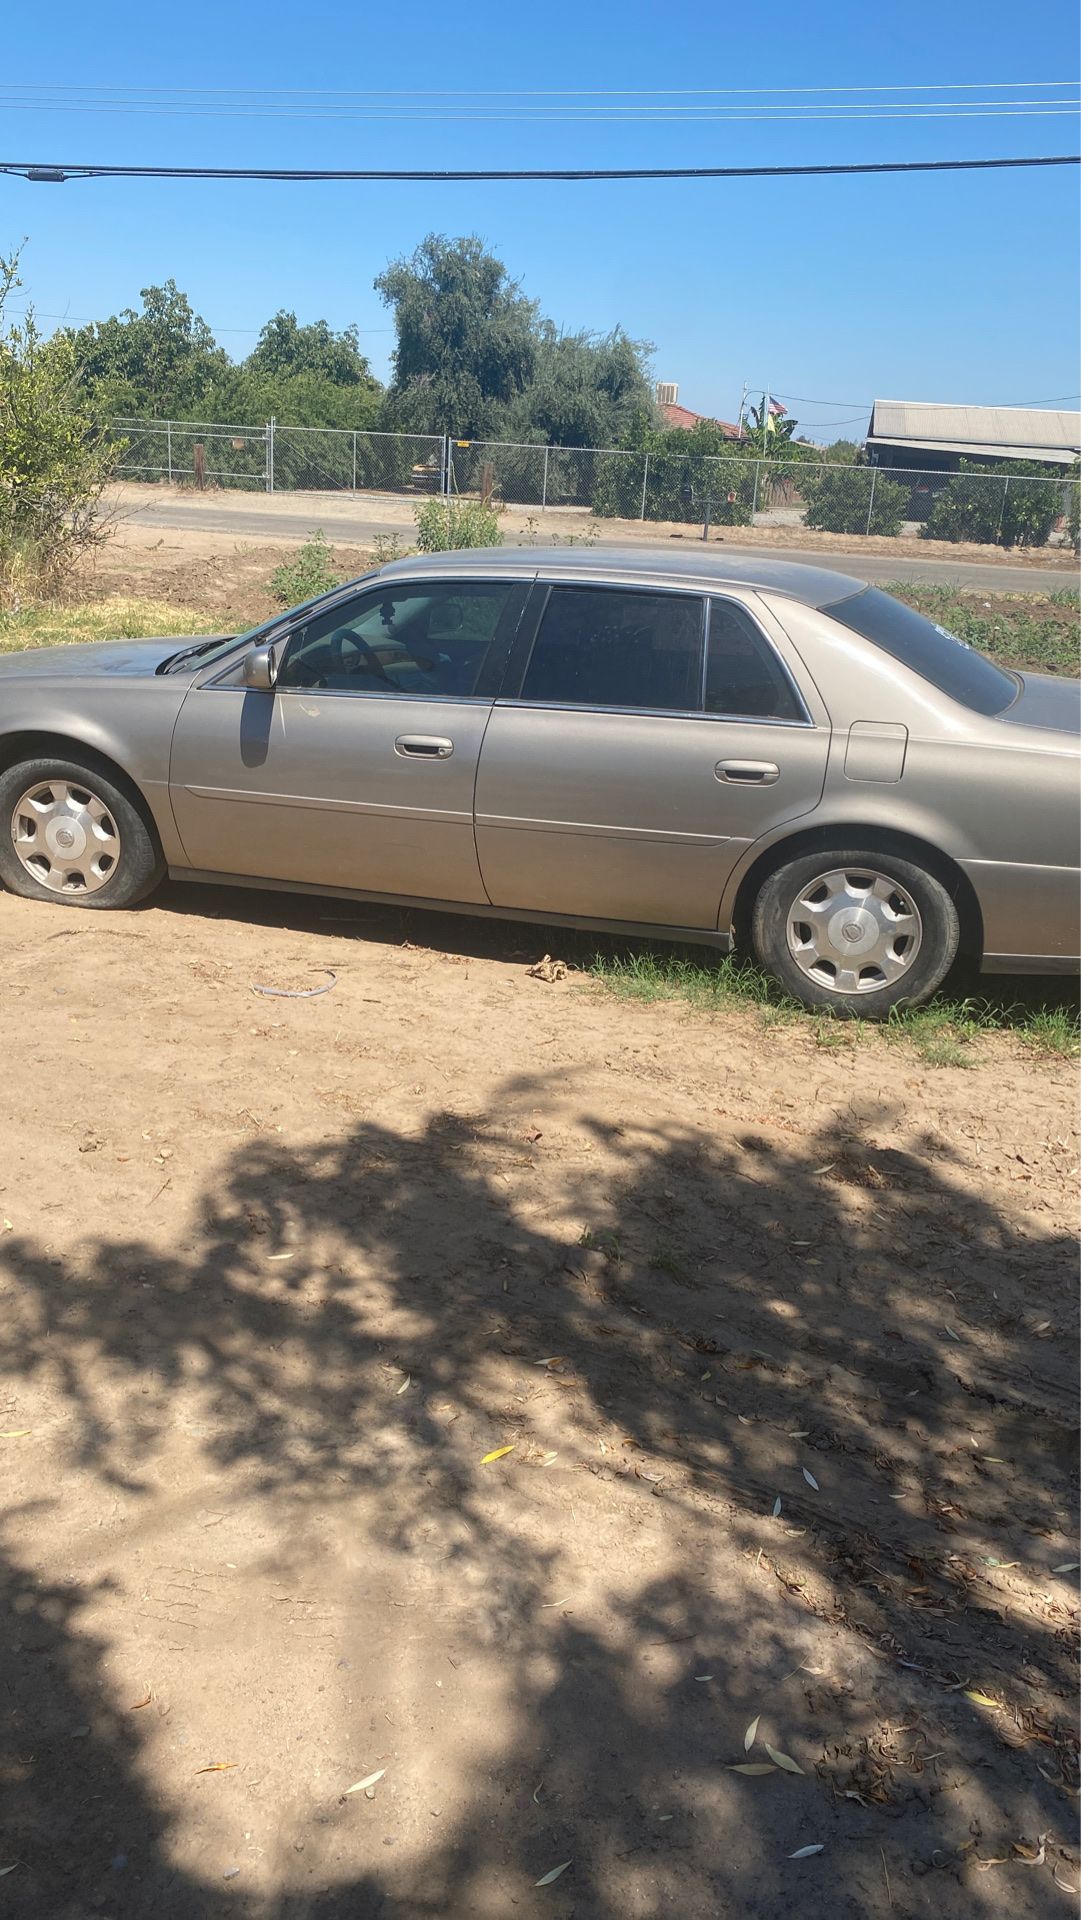 2002 deville Cadillac for parts or buy the whole car good motor